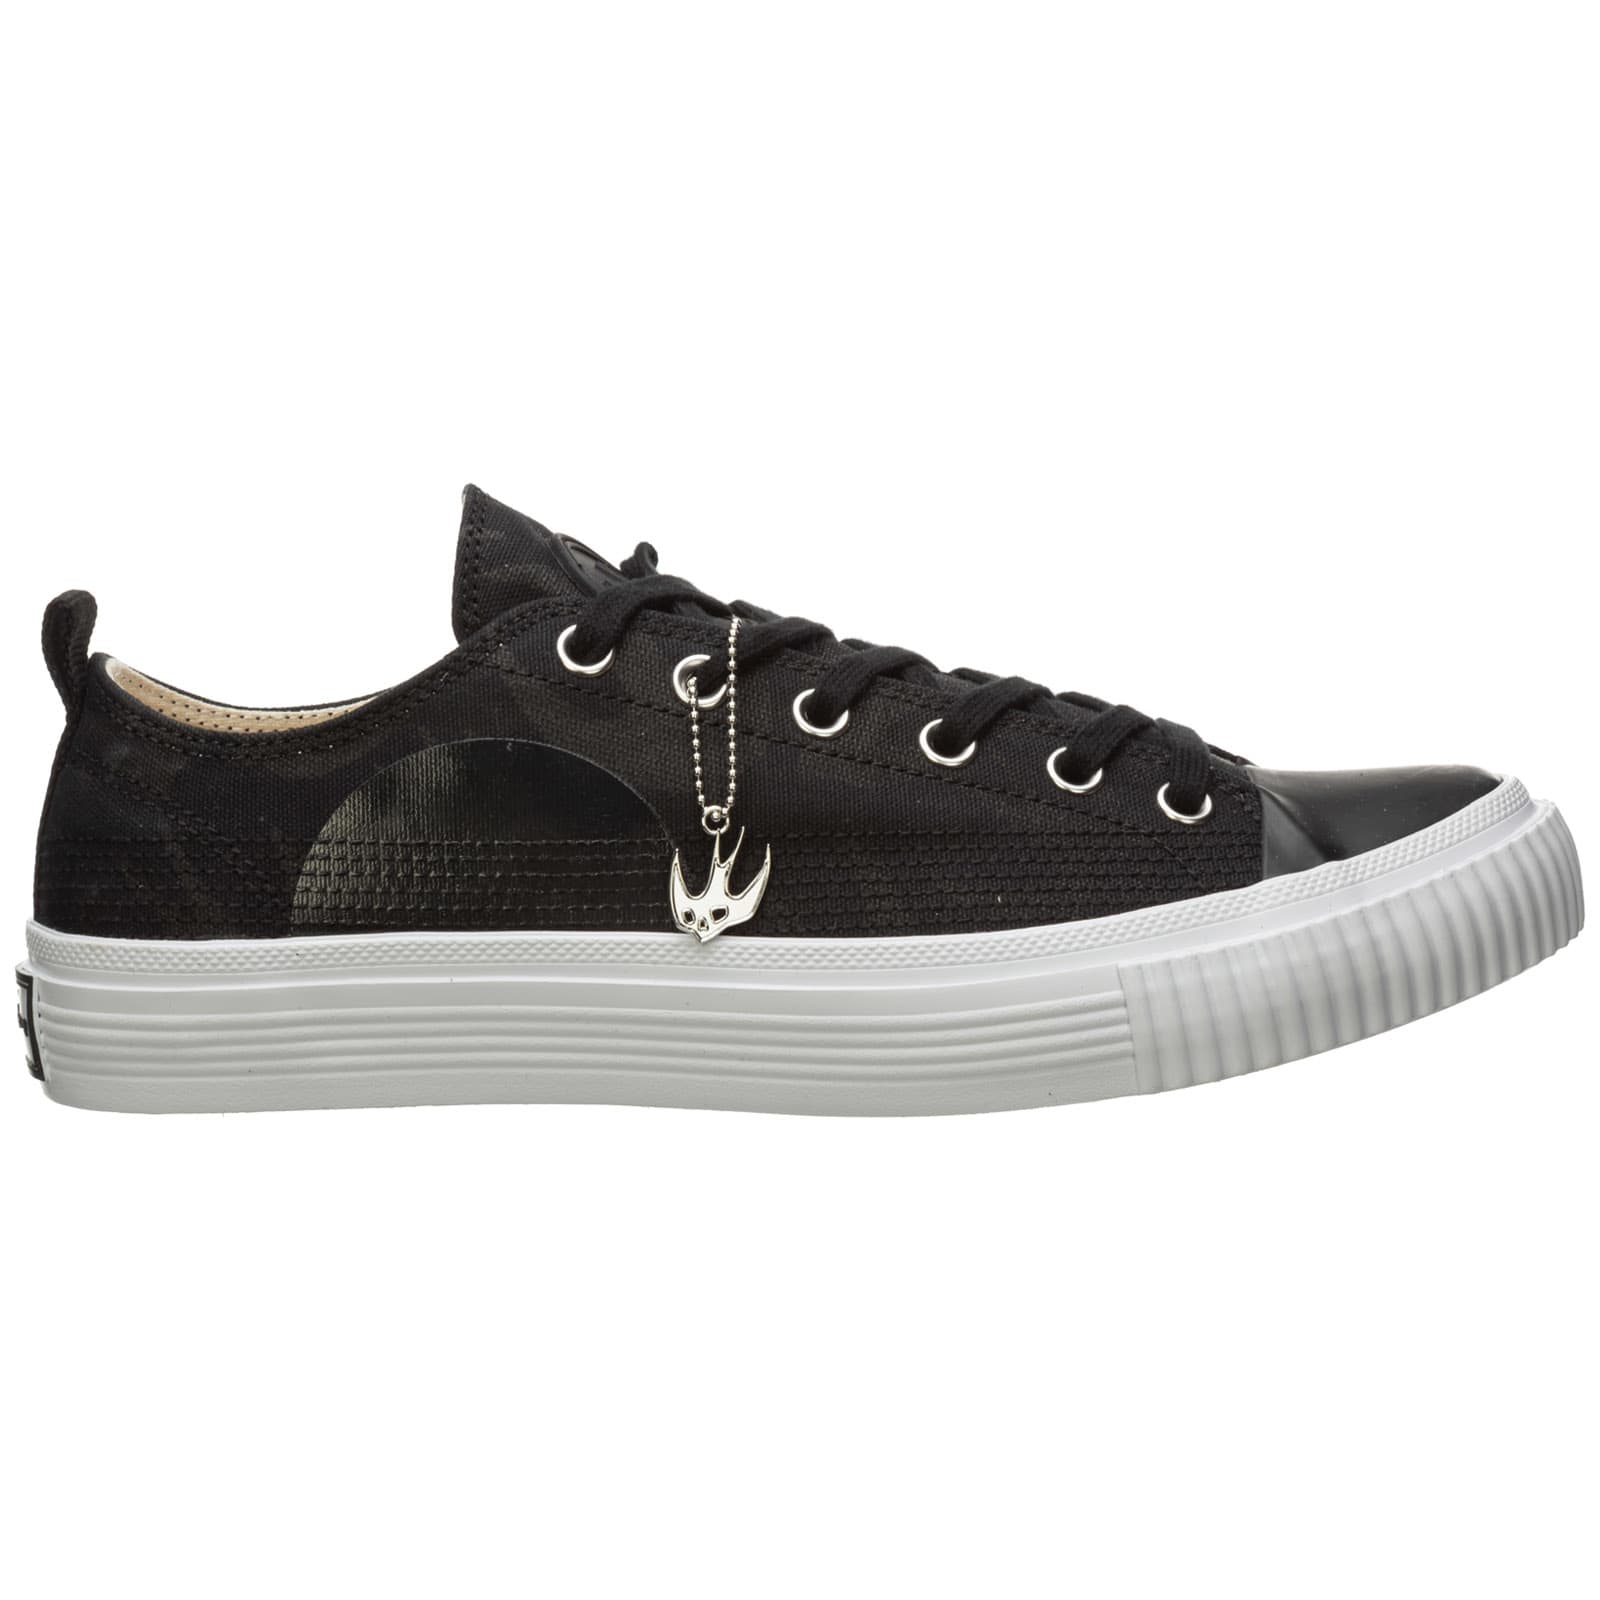 MCQ BY ALEXANDER MCQUEEN MCQ SWALLOW SWALLOW PLIMSOLL SNEAKERS,11208666